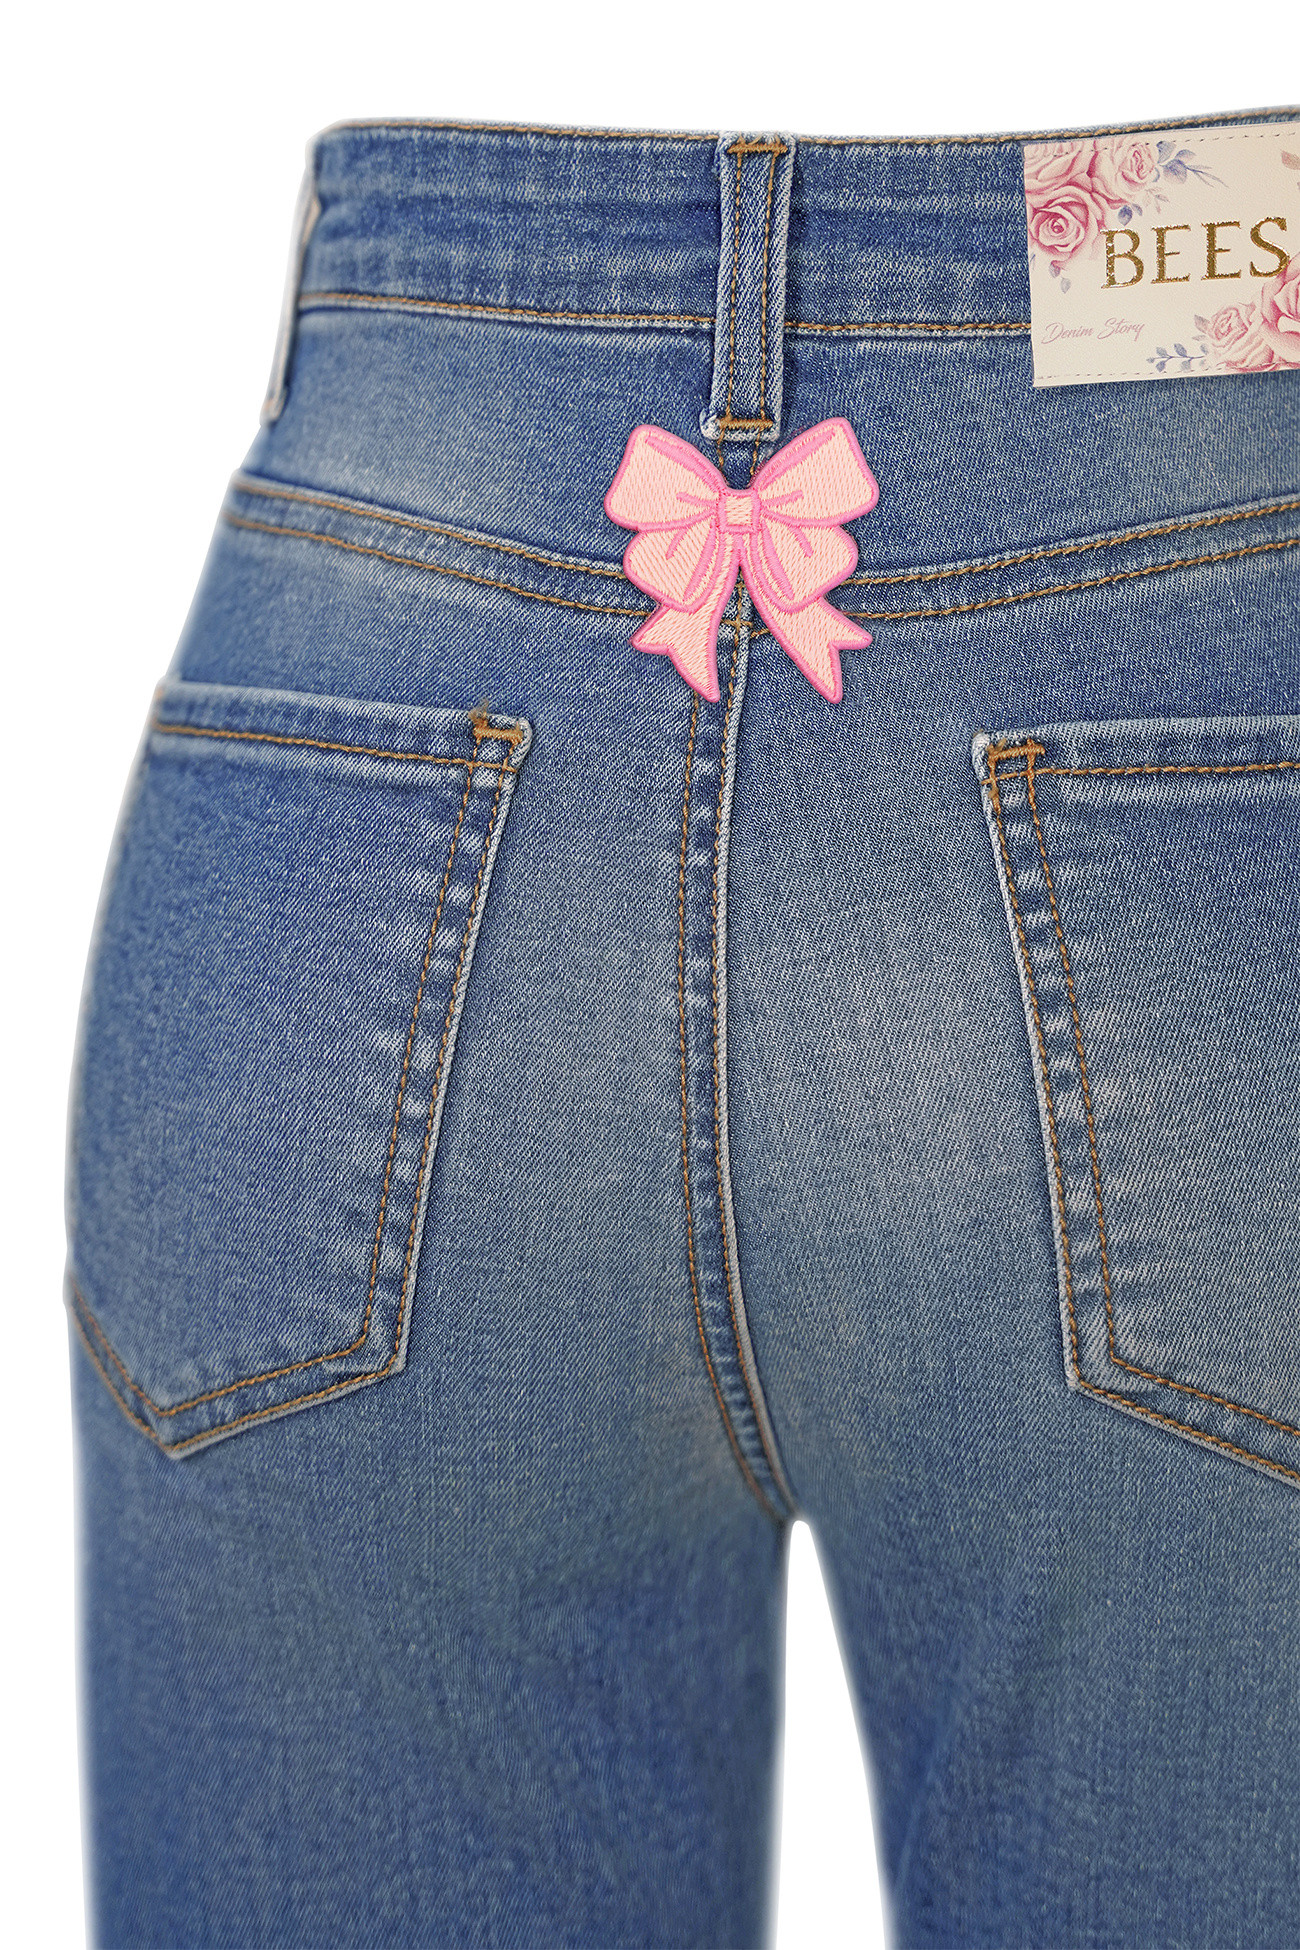 Bees - Iconic Jeans con fiocco, Denim, large image number 3